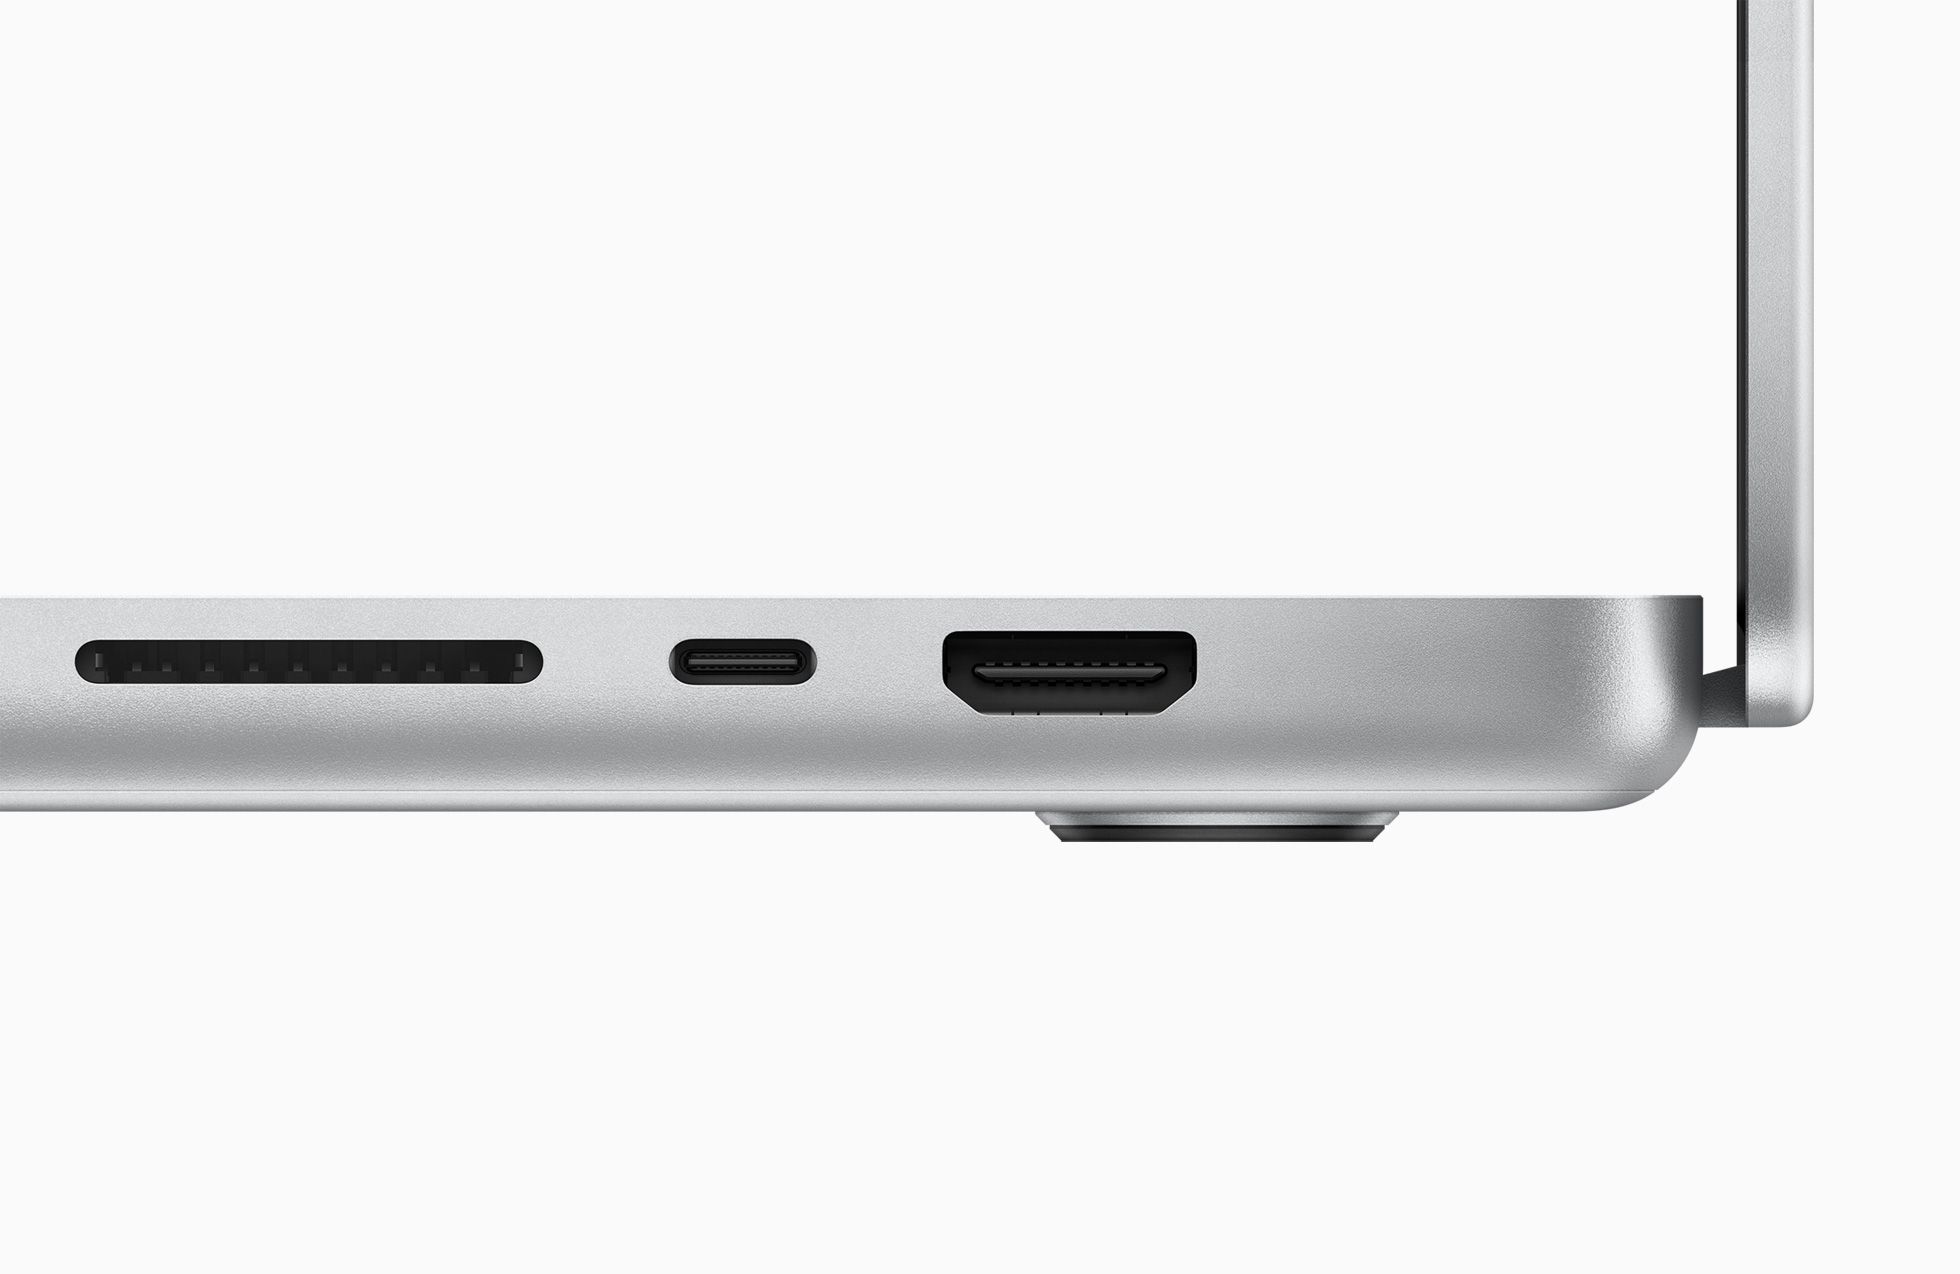 SD Card Slot in New MacBook Pros Supports UHSII With Speeds Up to 250